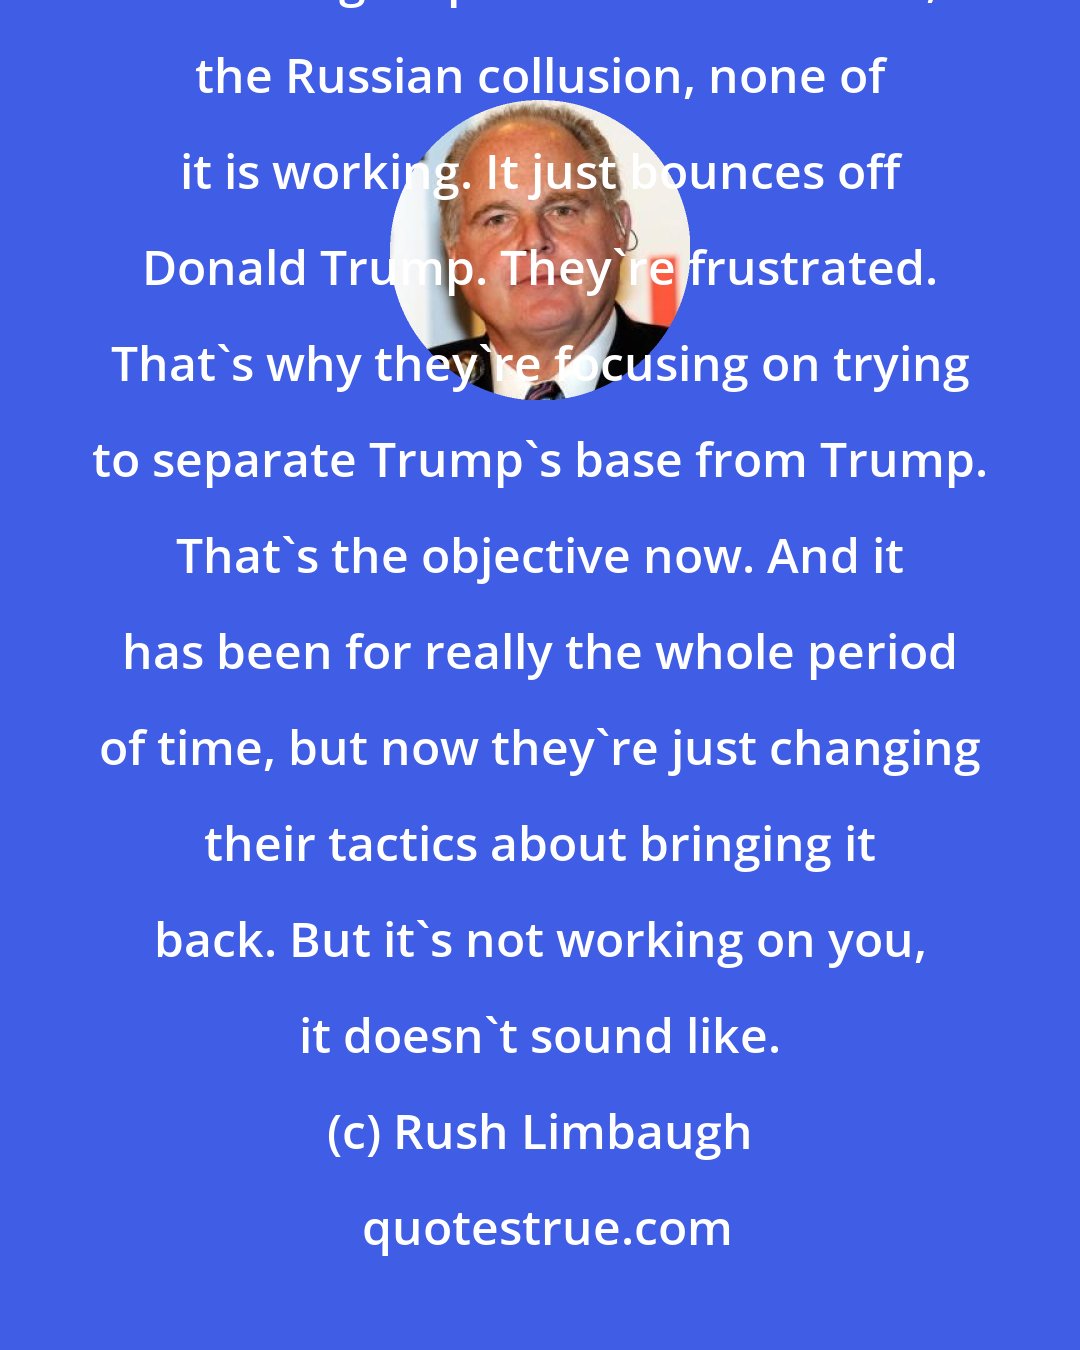 Rush Limbaugh: We had the story in the Politico, they've done their market research or focus groups. None of this stuff, the Russian collusion, none of it is working. It just bounces off Donald Trump. They're frustrated. That's why they're focusing on trying to separate Trump's base from Trump. That's the objective now. And it has been for really the whole period of time, but now they're just changing their tactics about bringing it back. But it's not working on you, it doesn't sound like.